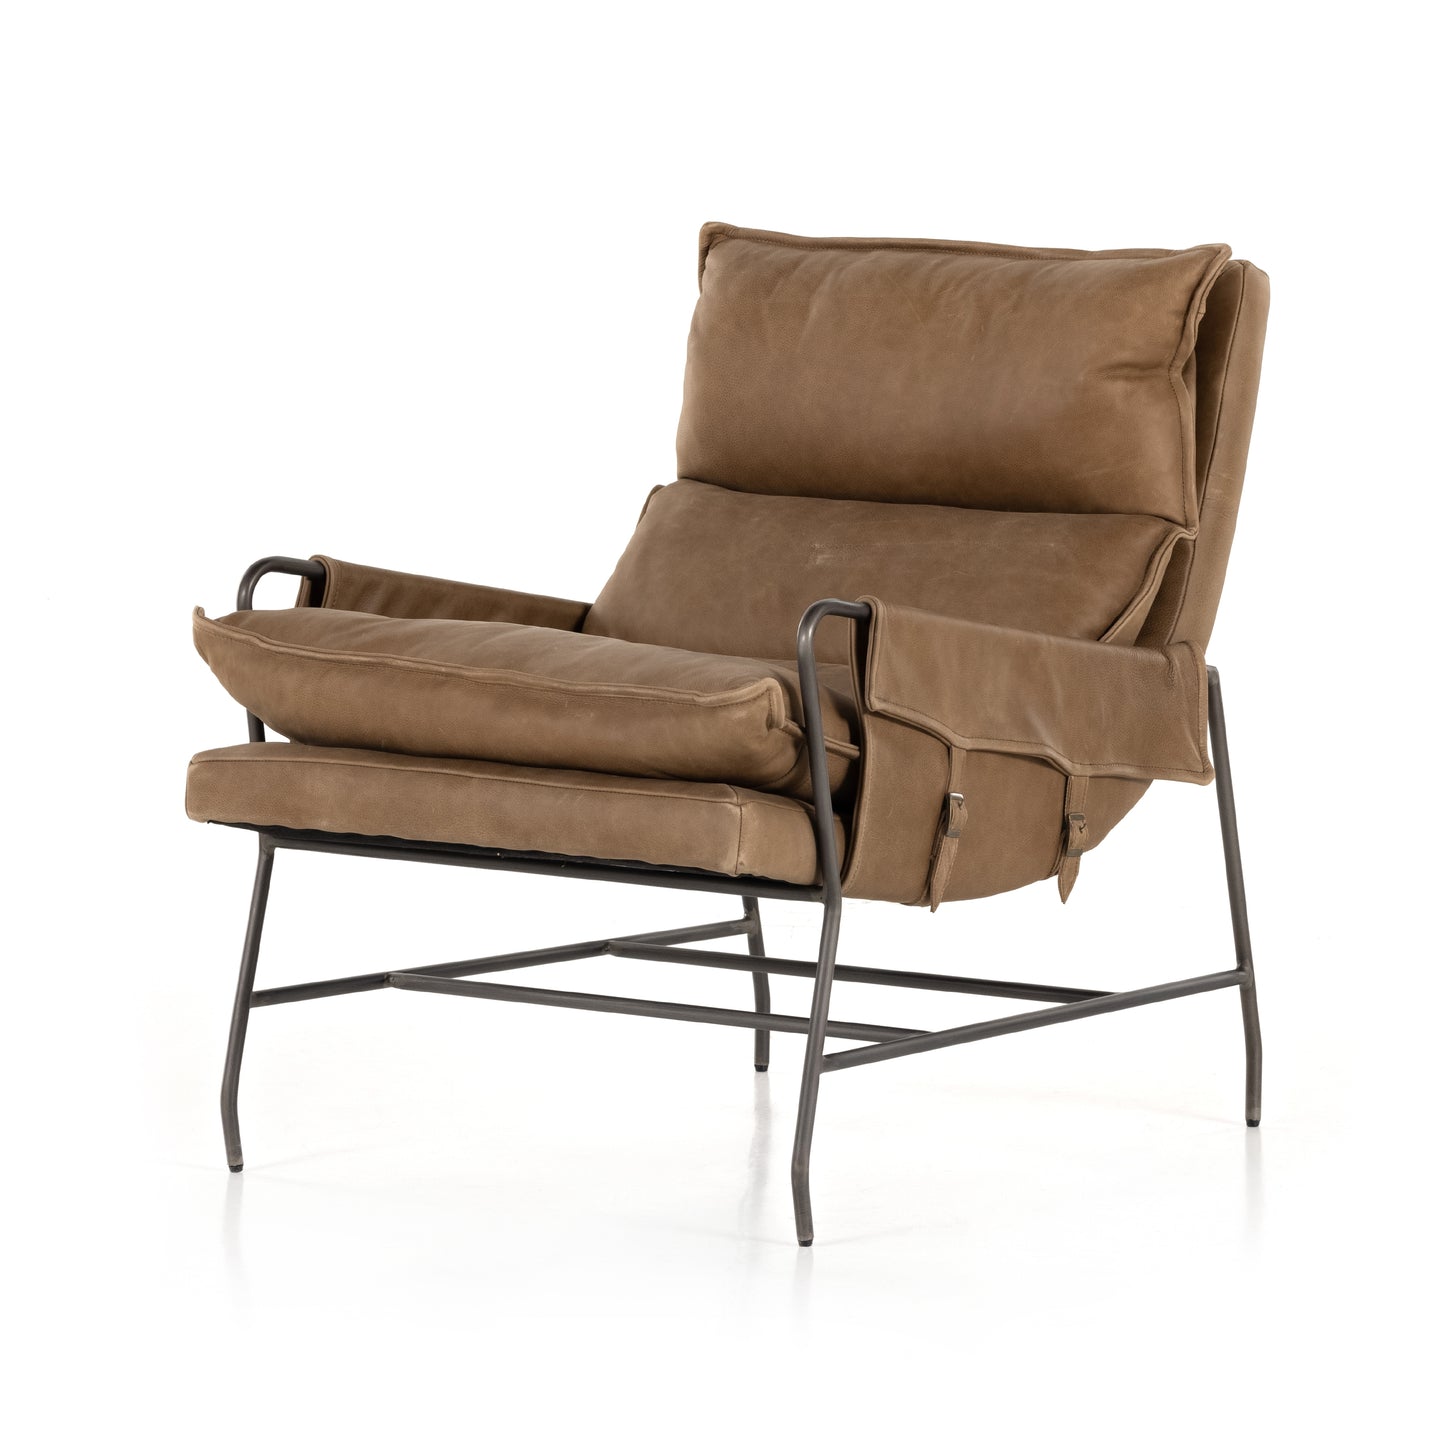 Load image into Gallery viewer, Taryn Chair Palermo DriftLounge Chair Four Hands  Palermo Drift   Four Hands, Burke Decor, Mid Century Modern Furniture, Old Bones Furniture Company, Old Bones Co, Modern Mid Century, Designer Furniture, https://www.oldbonesco.com/
